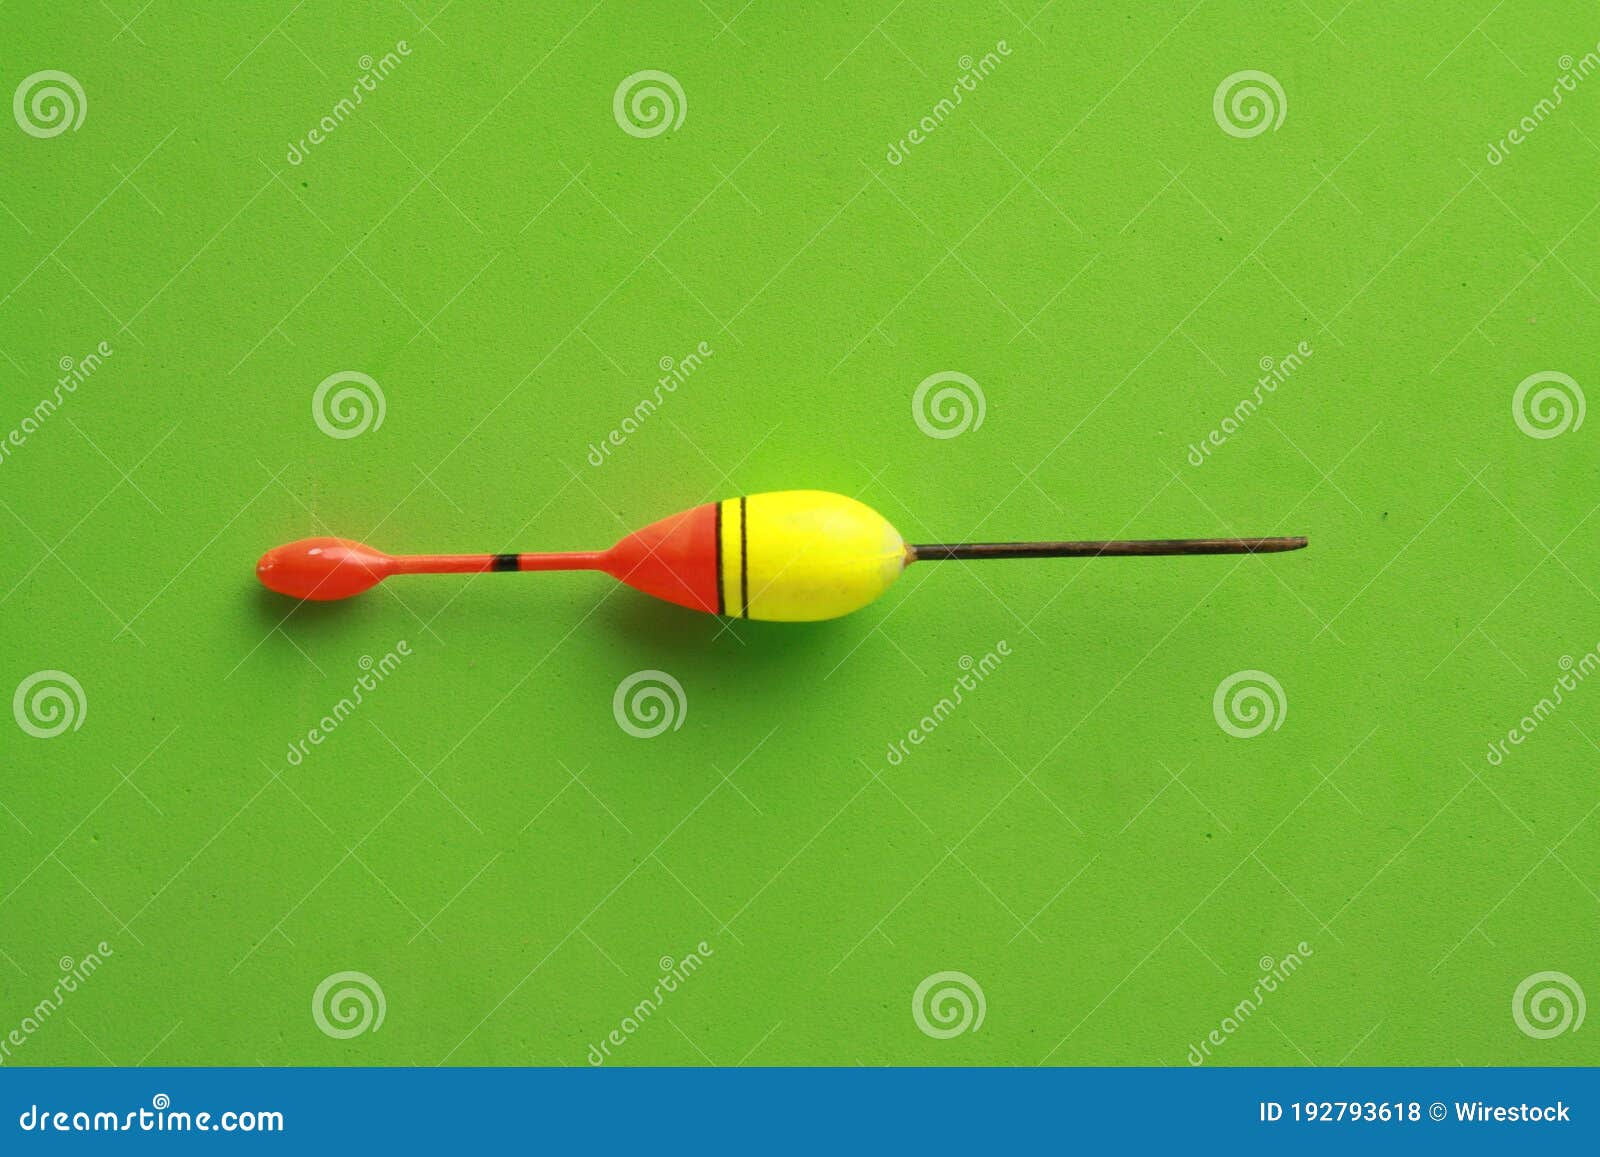 347 Colorful Fishing Gear Bobber Stock Photos - Free & Royalty